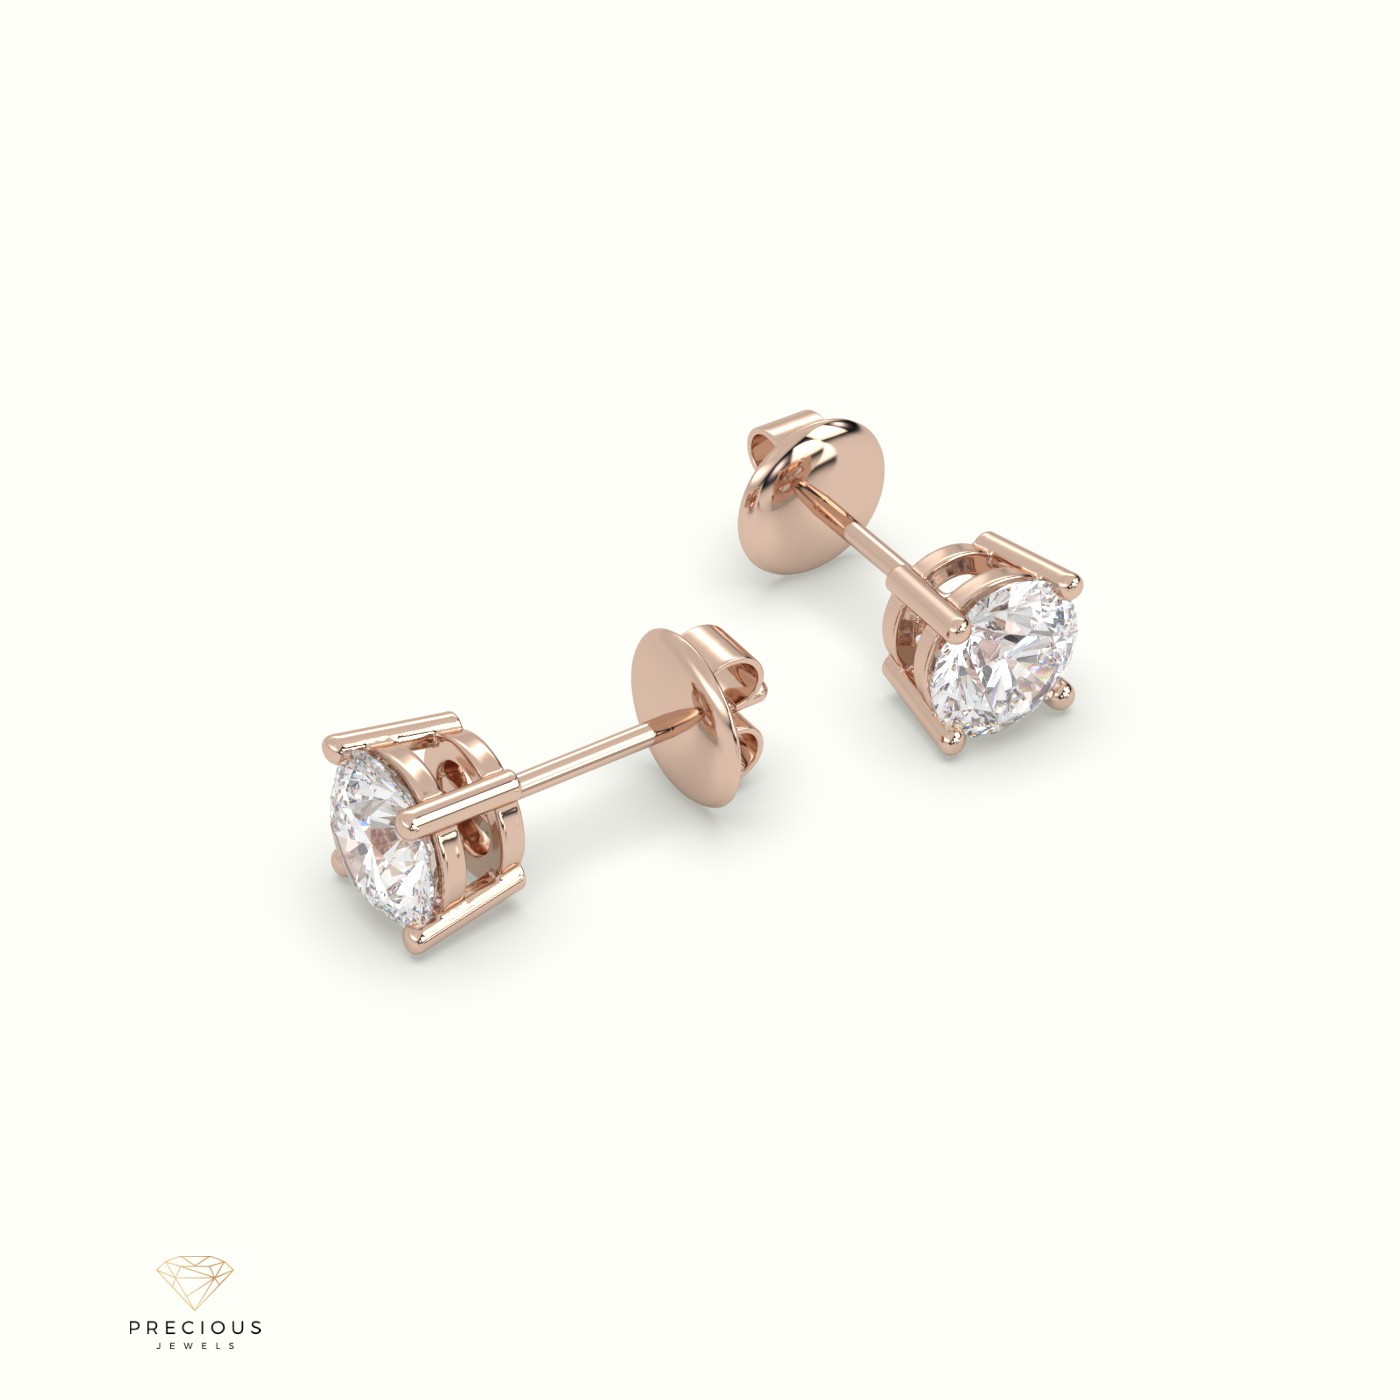 18k rose gold 4 prongs classic round diamond earring studs Photos & images